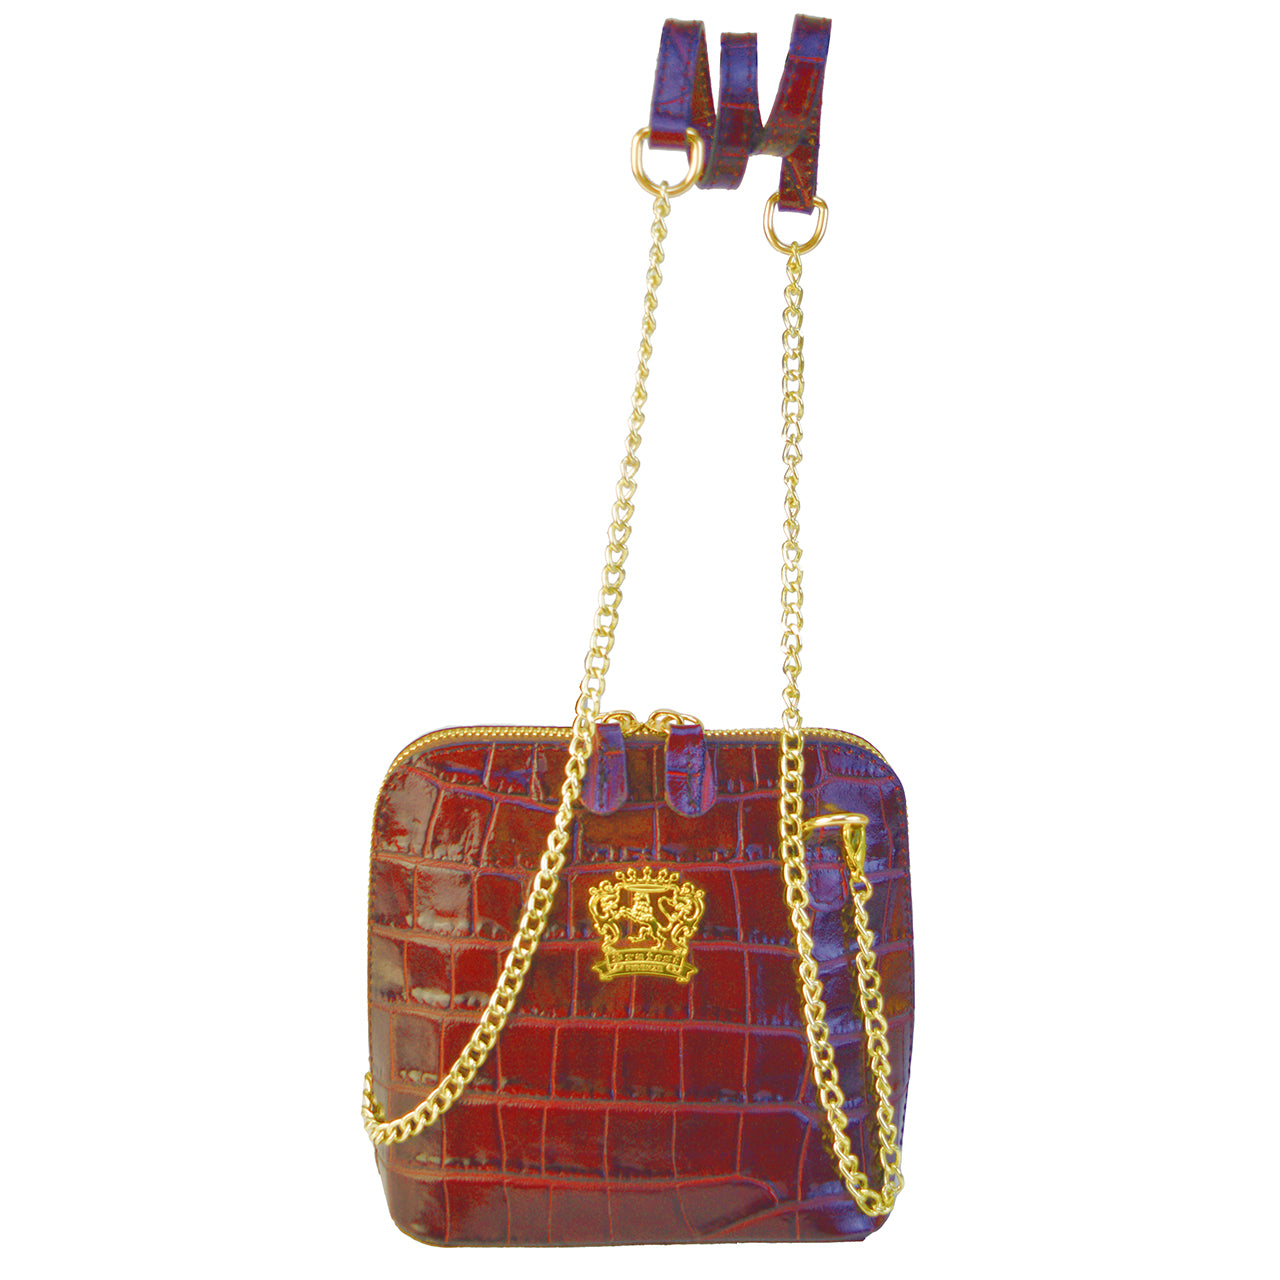 Pratesi Volterra King Lady Bag in real leather - Croco Embossed Leather Electric Blue